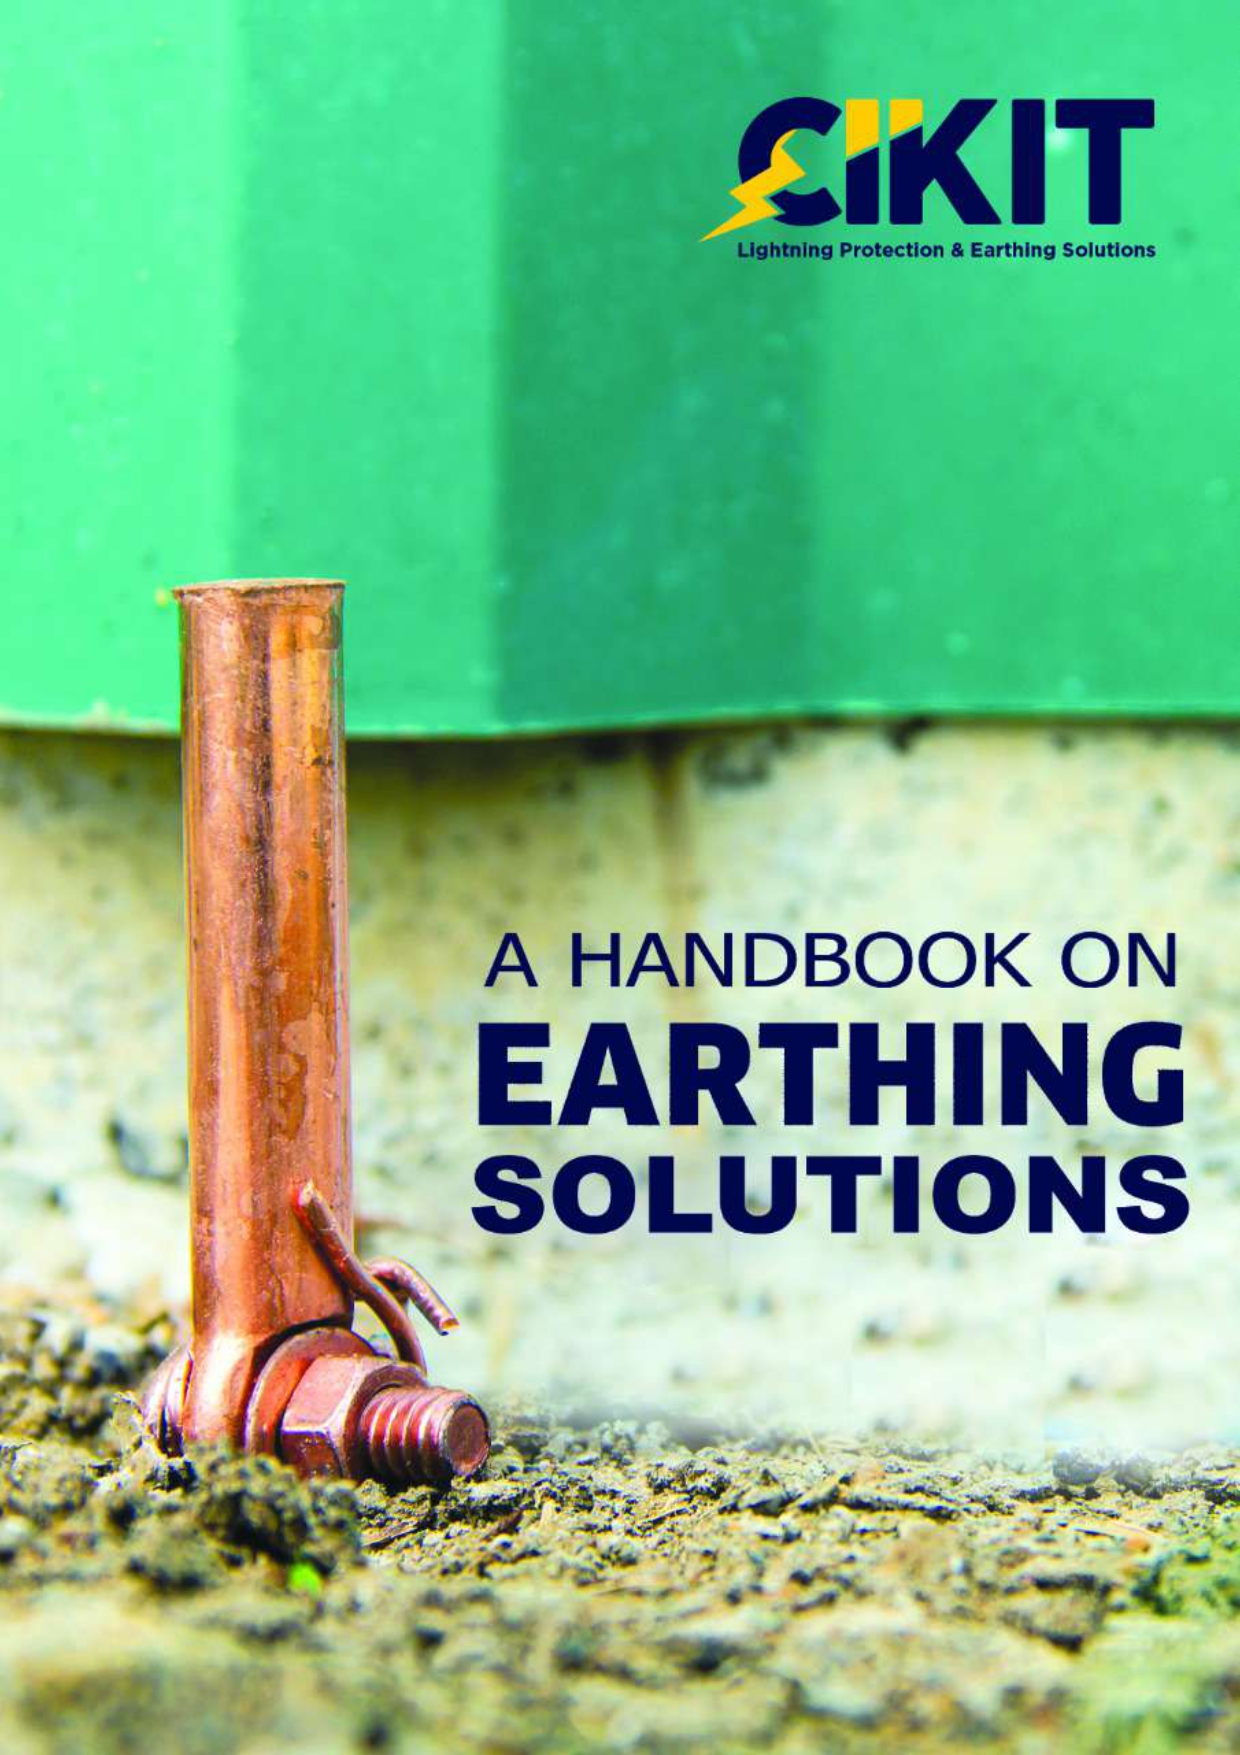 The cover page image of 'A handbook on Earthing Solution'.